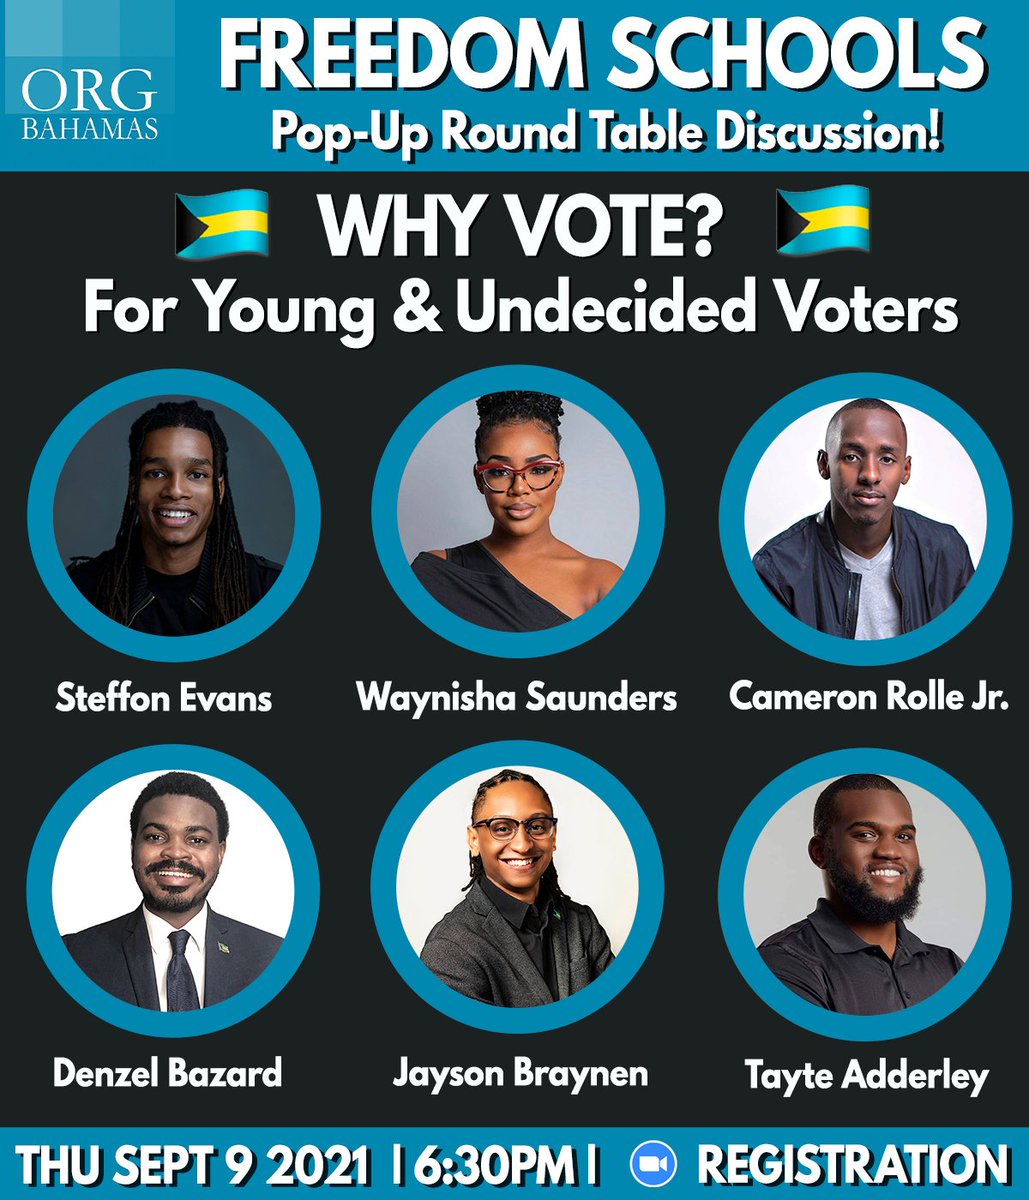 Join us Thursday Sept 9th at 6pm for a Freedom Schools Pop-Up Discussion 'Why Vote'. Sign up to join us at buff.ly/3BVnNr8! Also feel free to let us know some of your concerns about your prospects around voting in the comments! #ORGBahamas #FreedomSchools